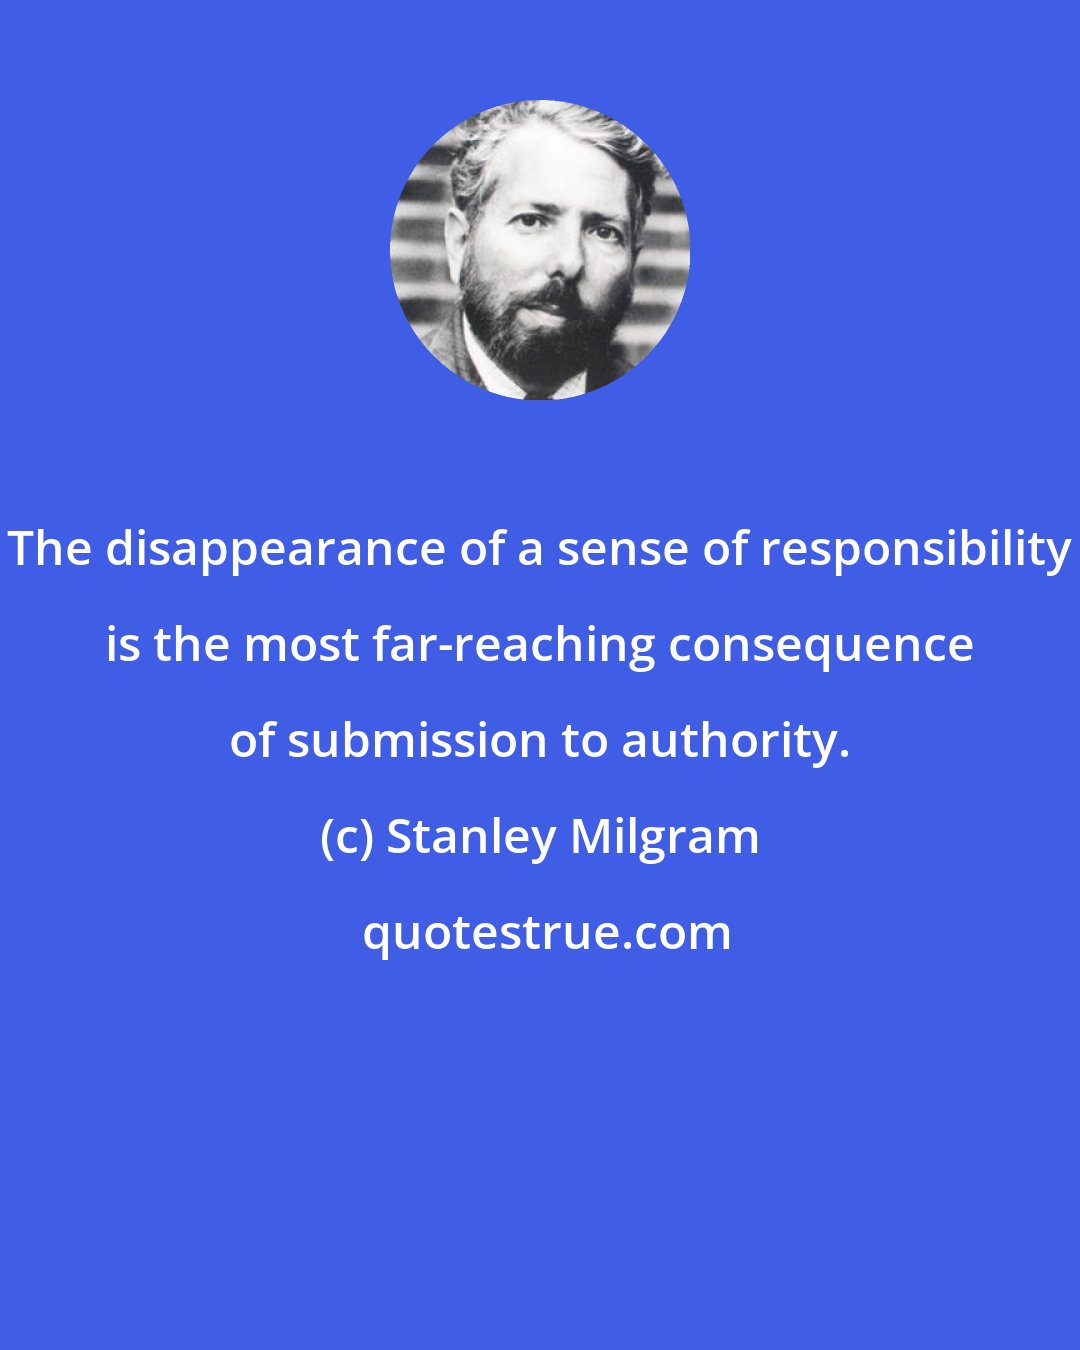 Stanley Milgram: The disappearance of a sense of responsibility is the most far-reaching consequence of submission to authority.